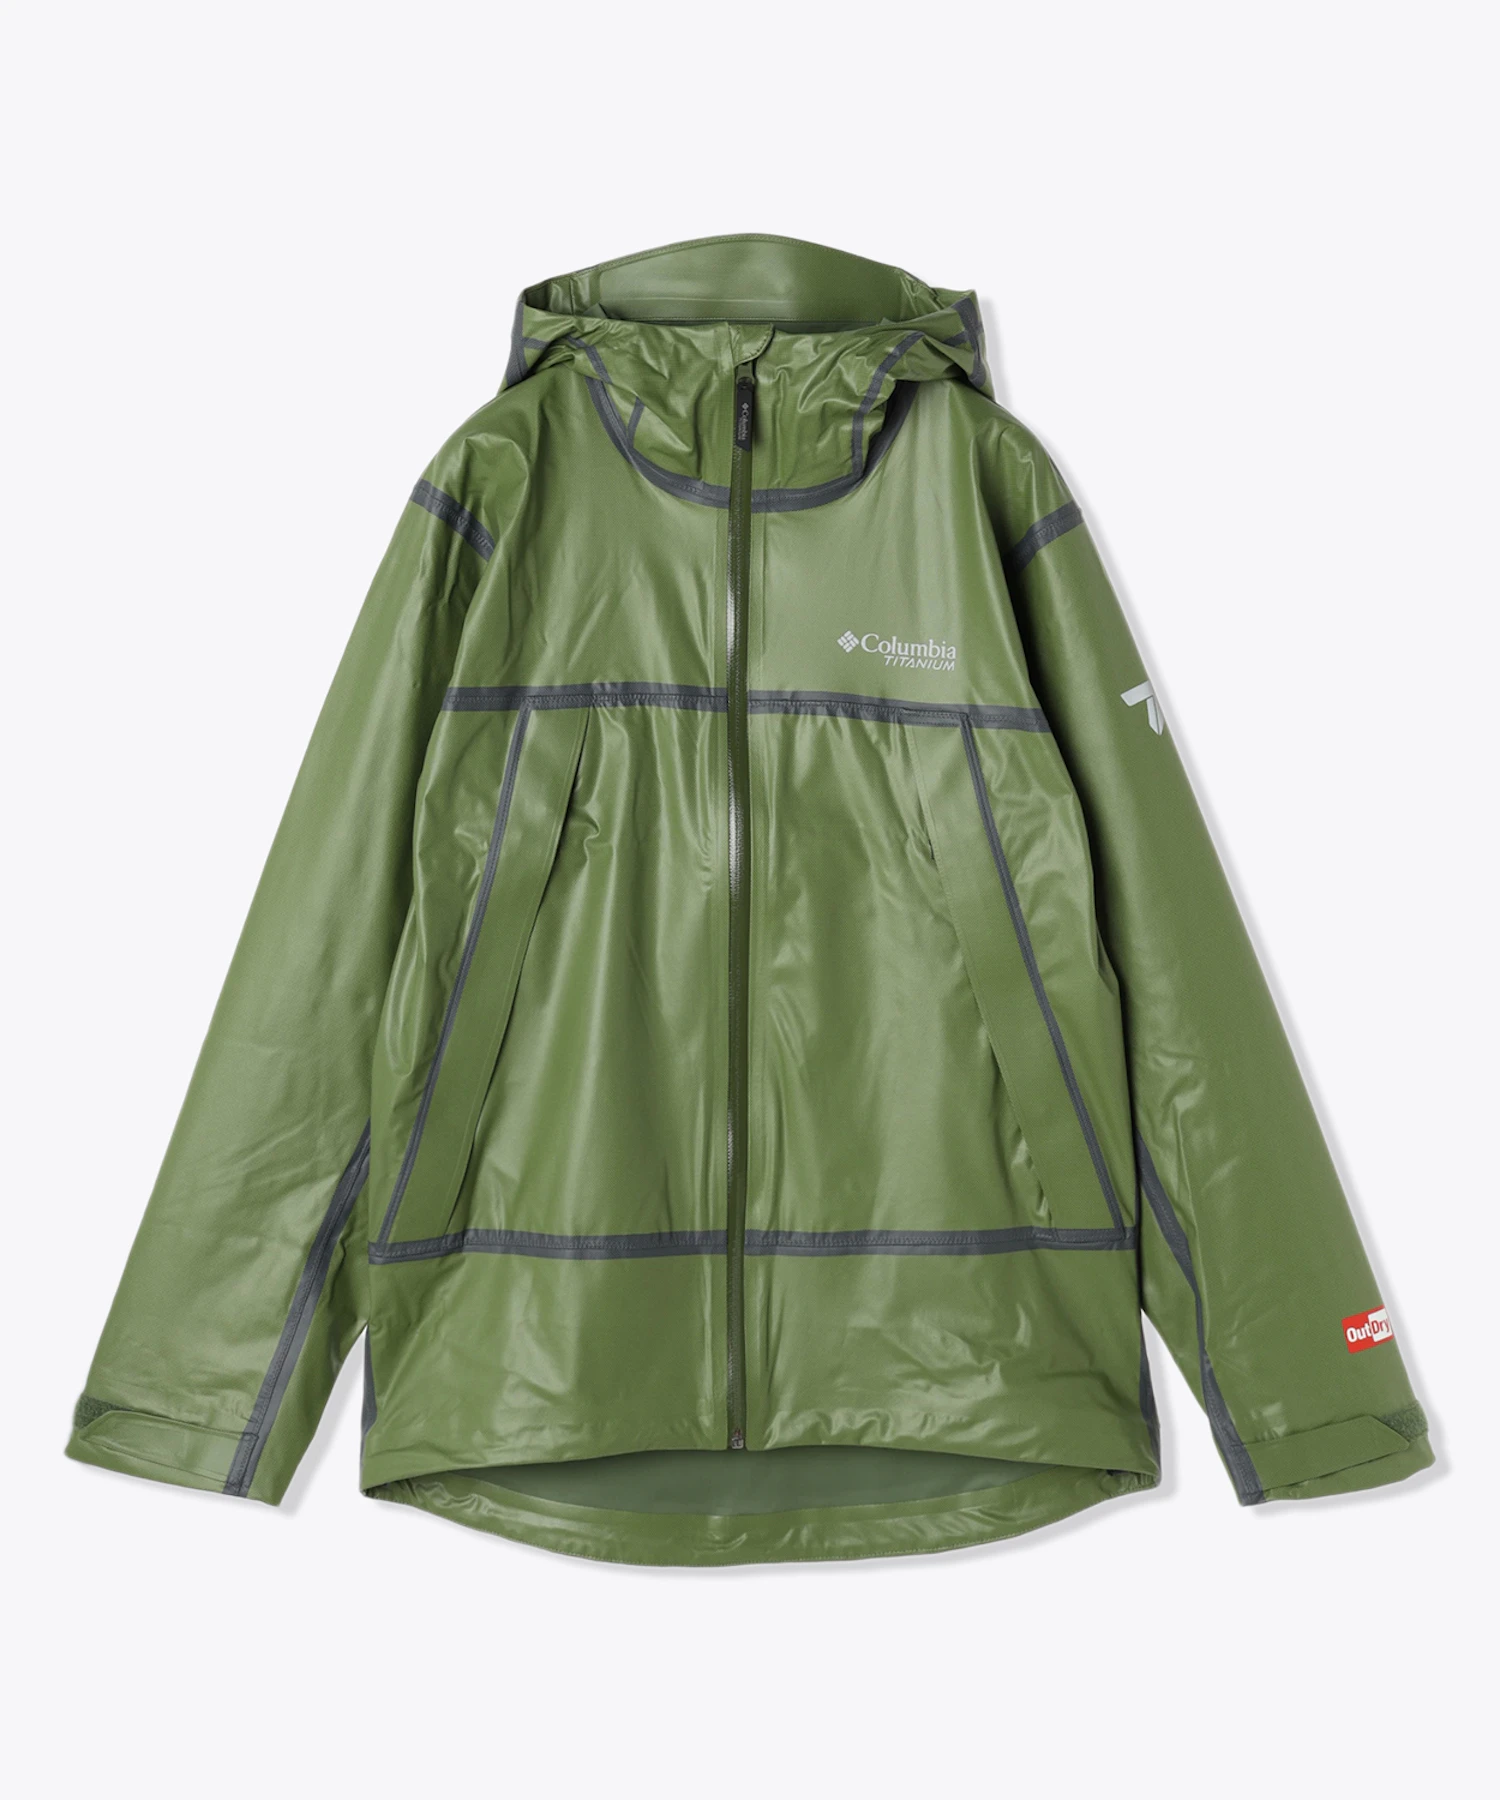 Outdry Extreme Wyldwood Shell, 33,000 yen (tax included). Besides the pictured Canteen, it’s also available in Black, and sizes range from S, M, L, to XL